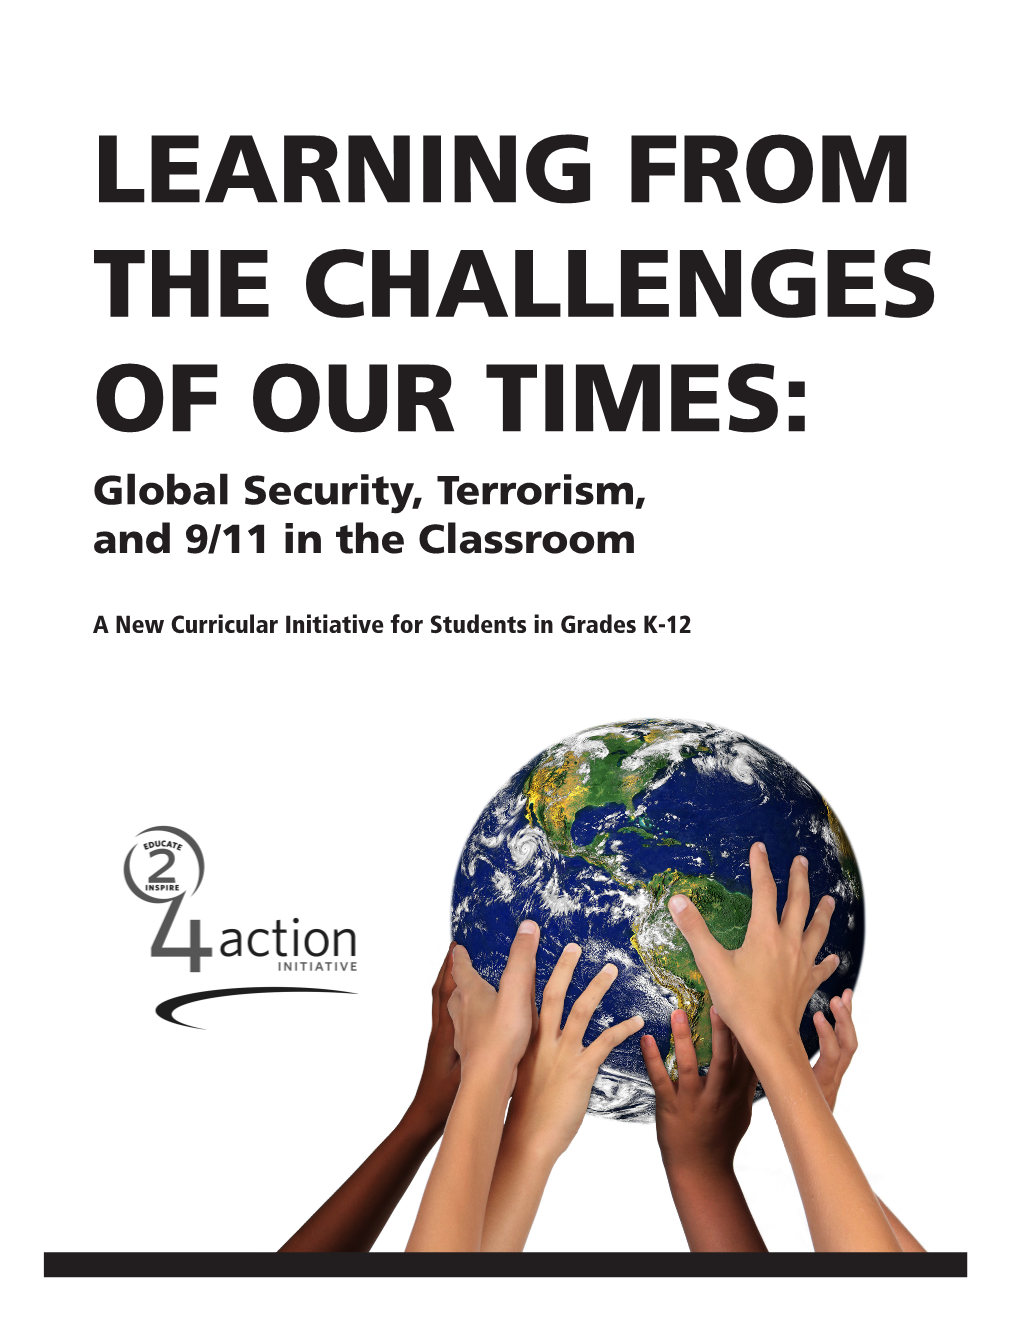 Terrorism, and 9/11 in the Classroom